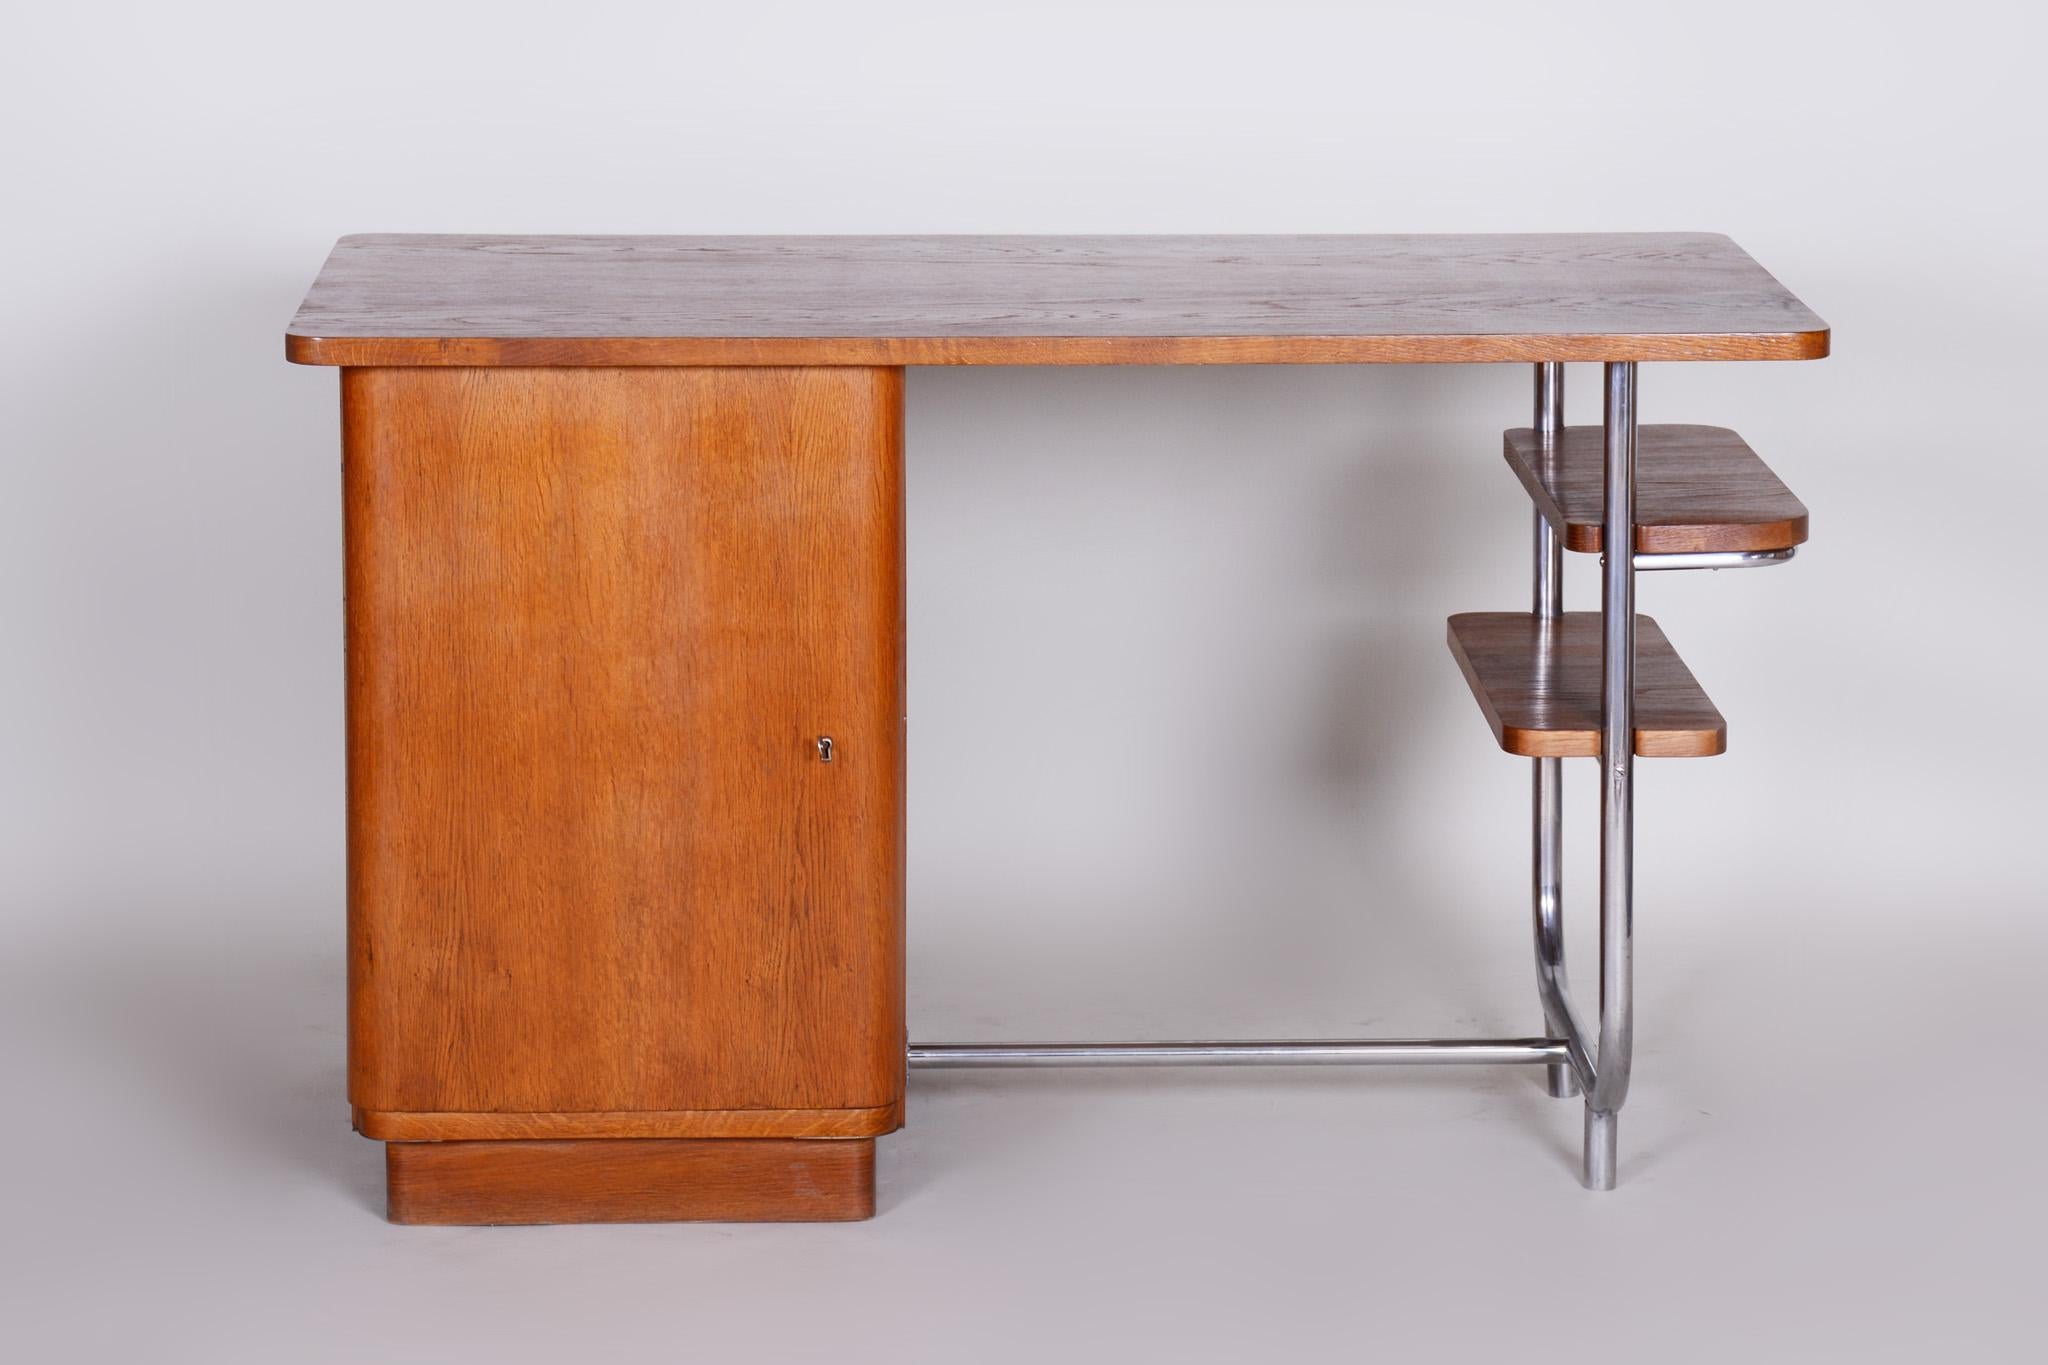 Desk with a frame in tubular chromed steel.
Manufactured by Hynek Gottwald, Czechia, in the 1930s.
Completely restored. Tubular steel with original chrome plating and patina. Fully cleaned.